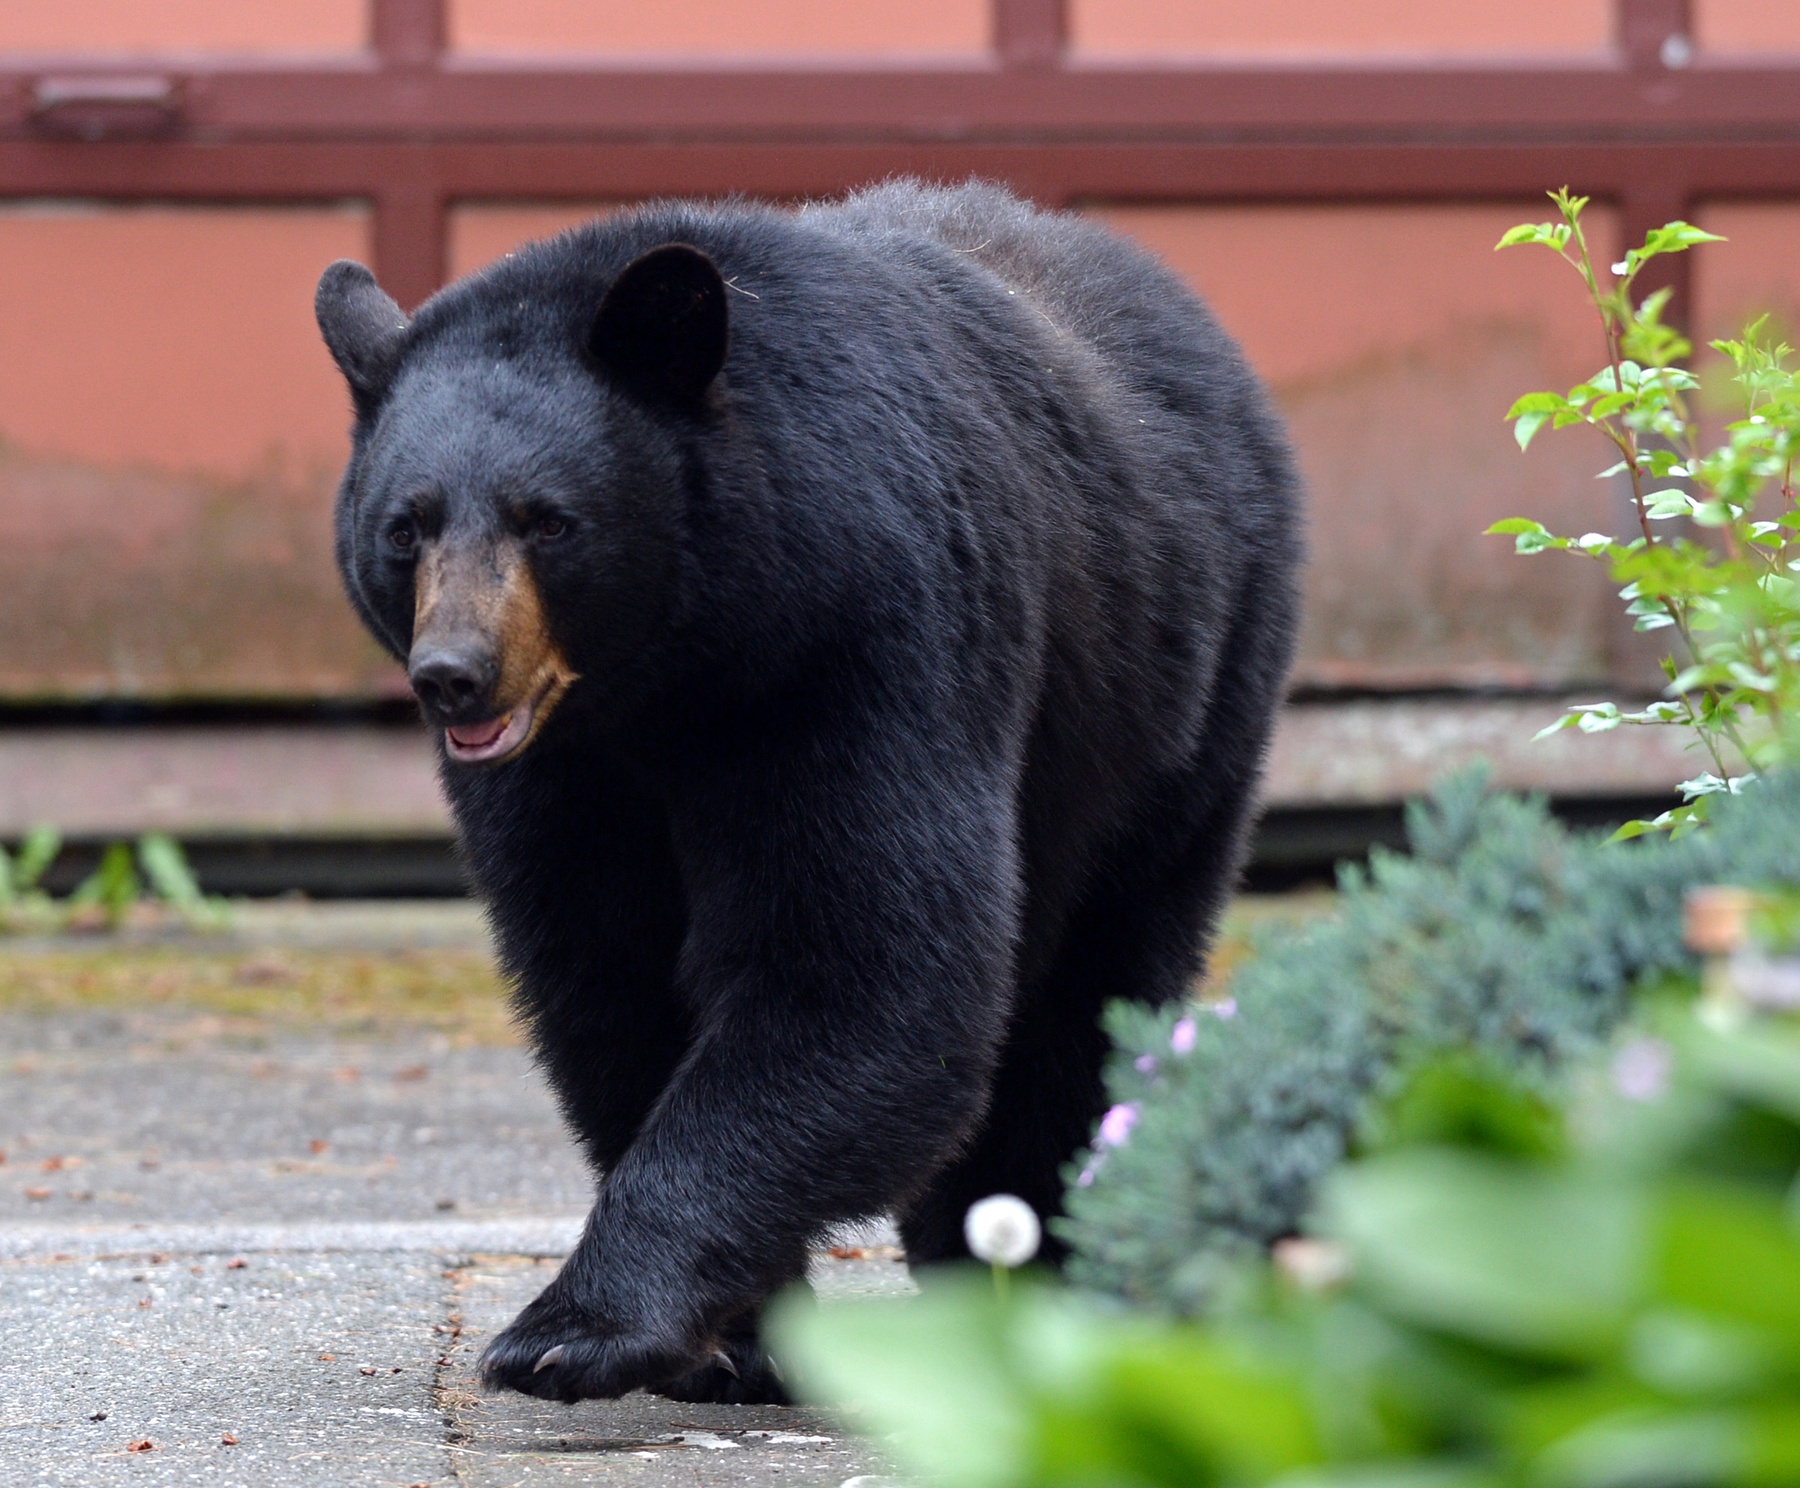 Bear Attacks in Sparta, NJ Result in One Dog Dead, Another Injured